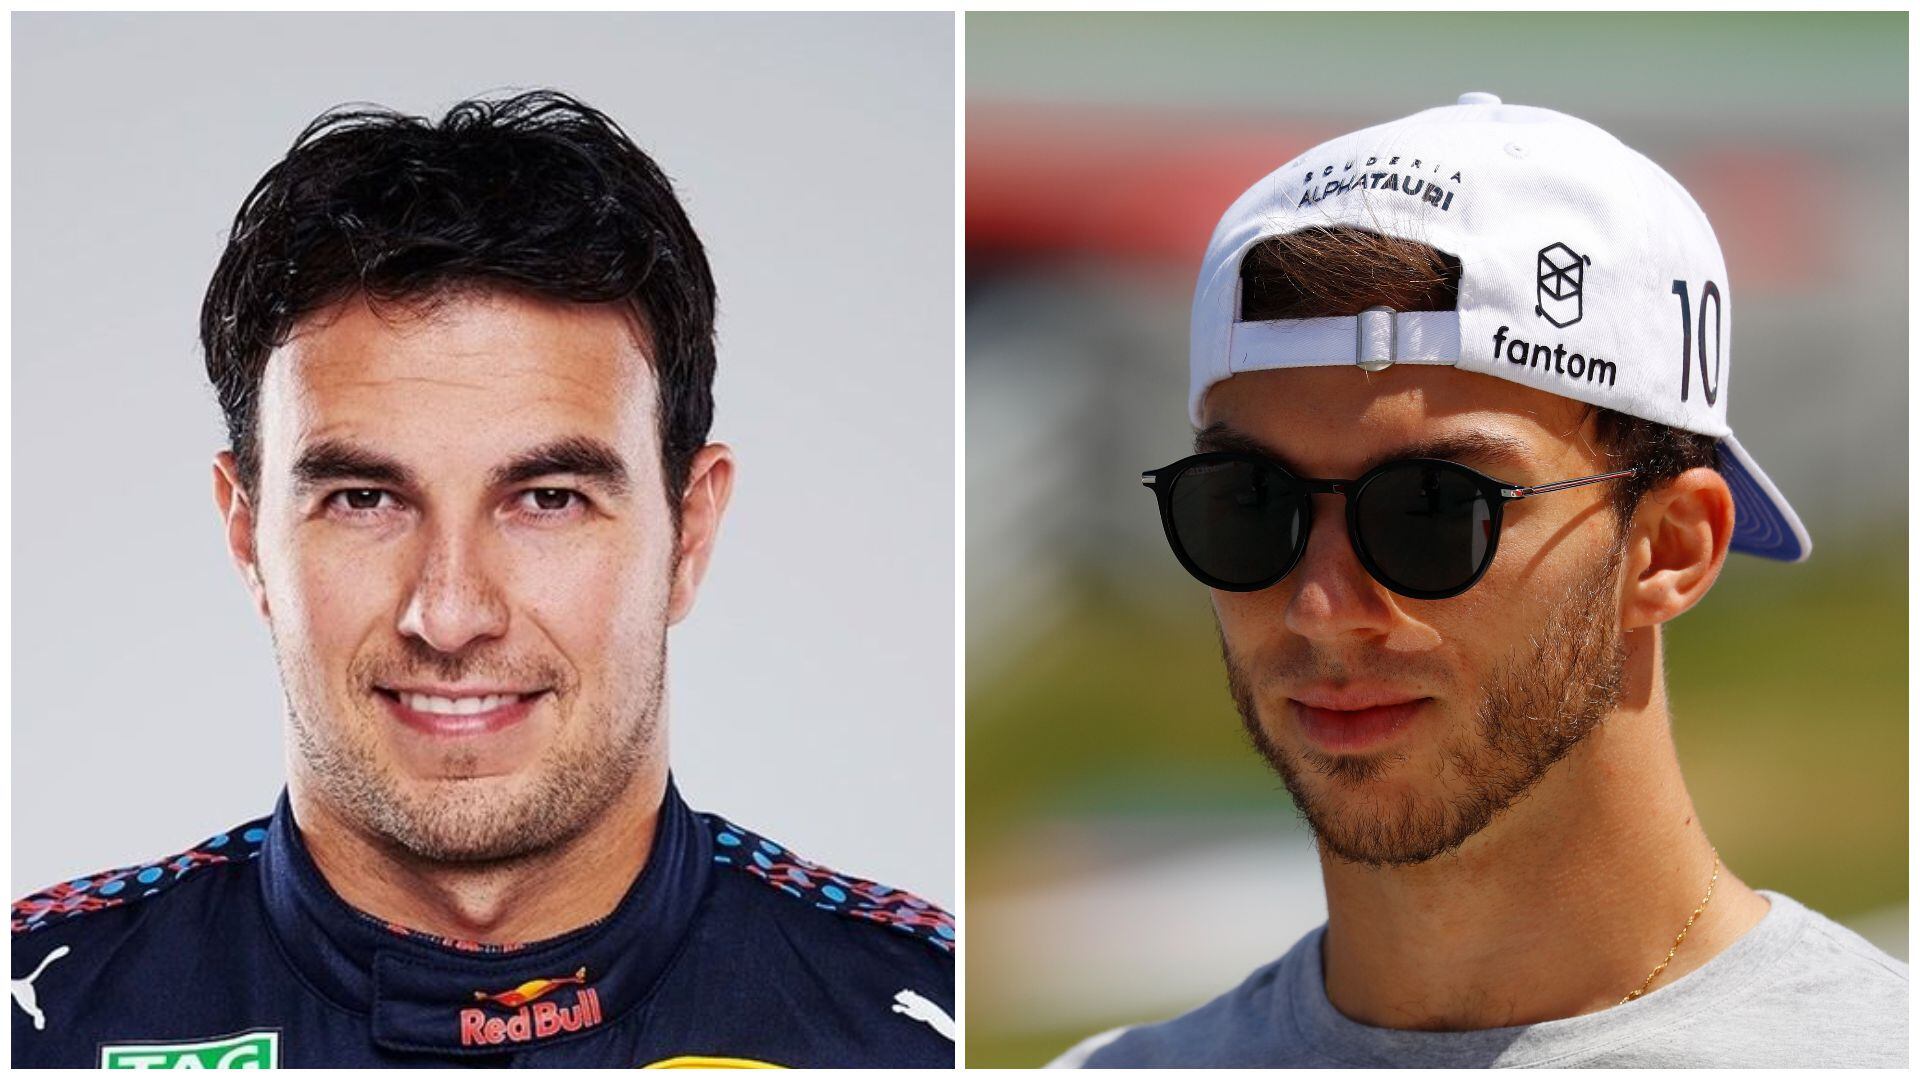 Pierre Gasly and Checo Pérez (Photo: Instagram / redbullracing / Reuters)